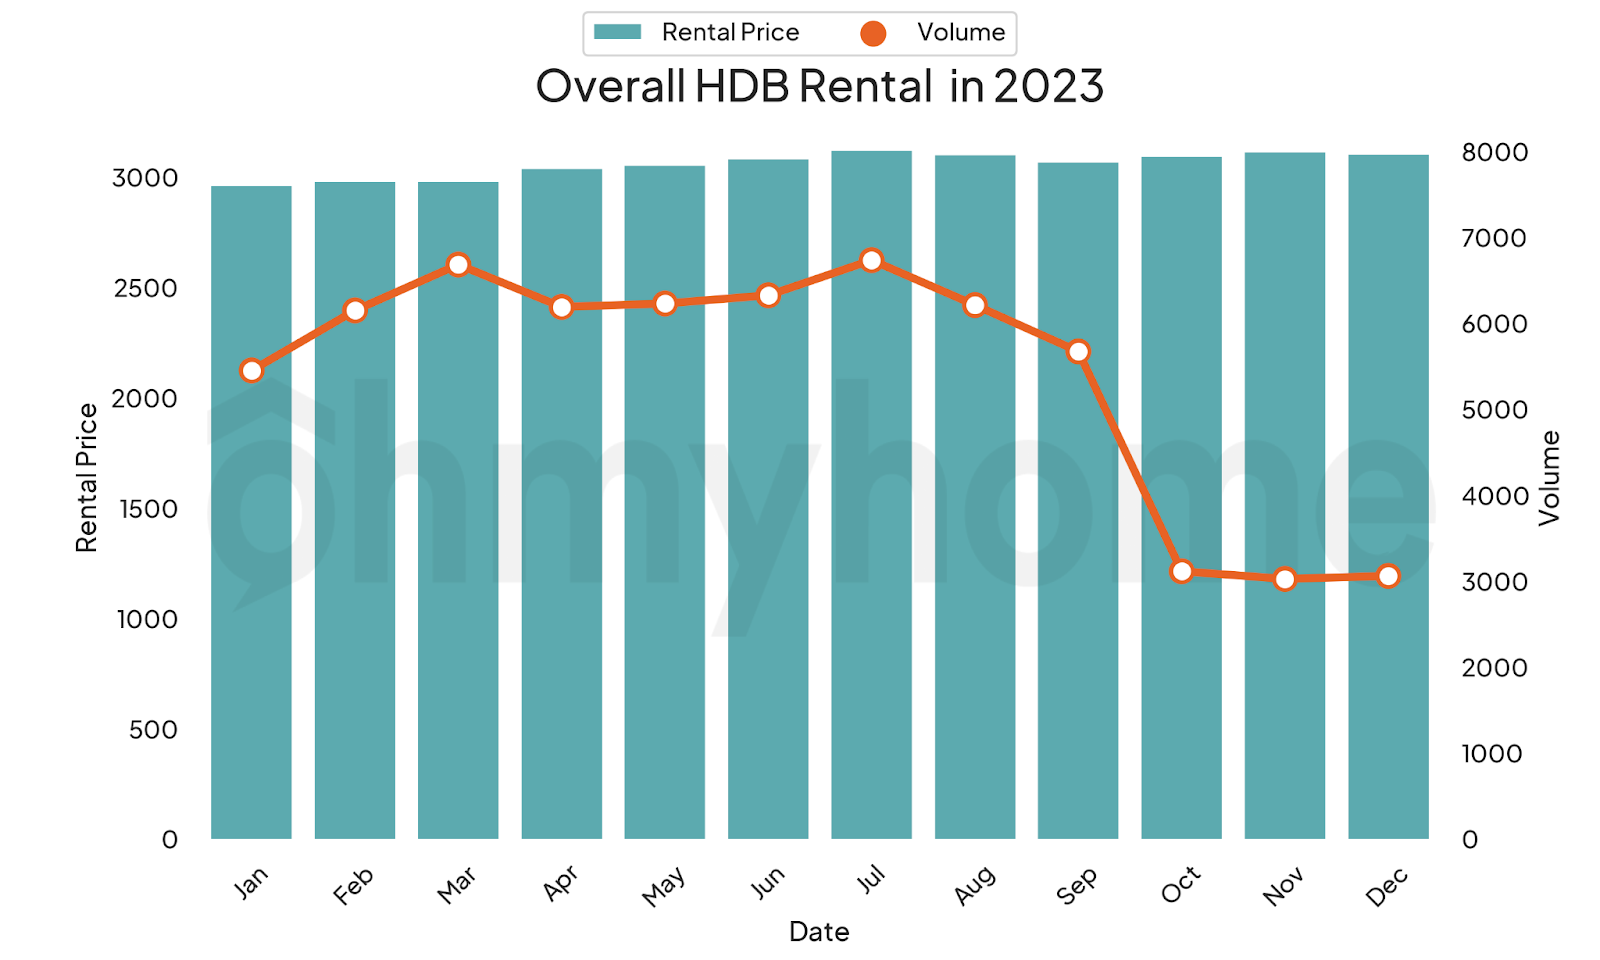 A bar and line chart showing the rental transaction volume and rental price movement of HDB flats in Singapore in 2023